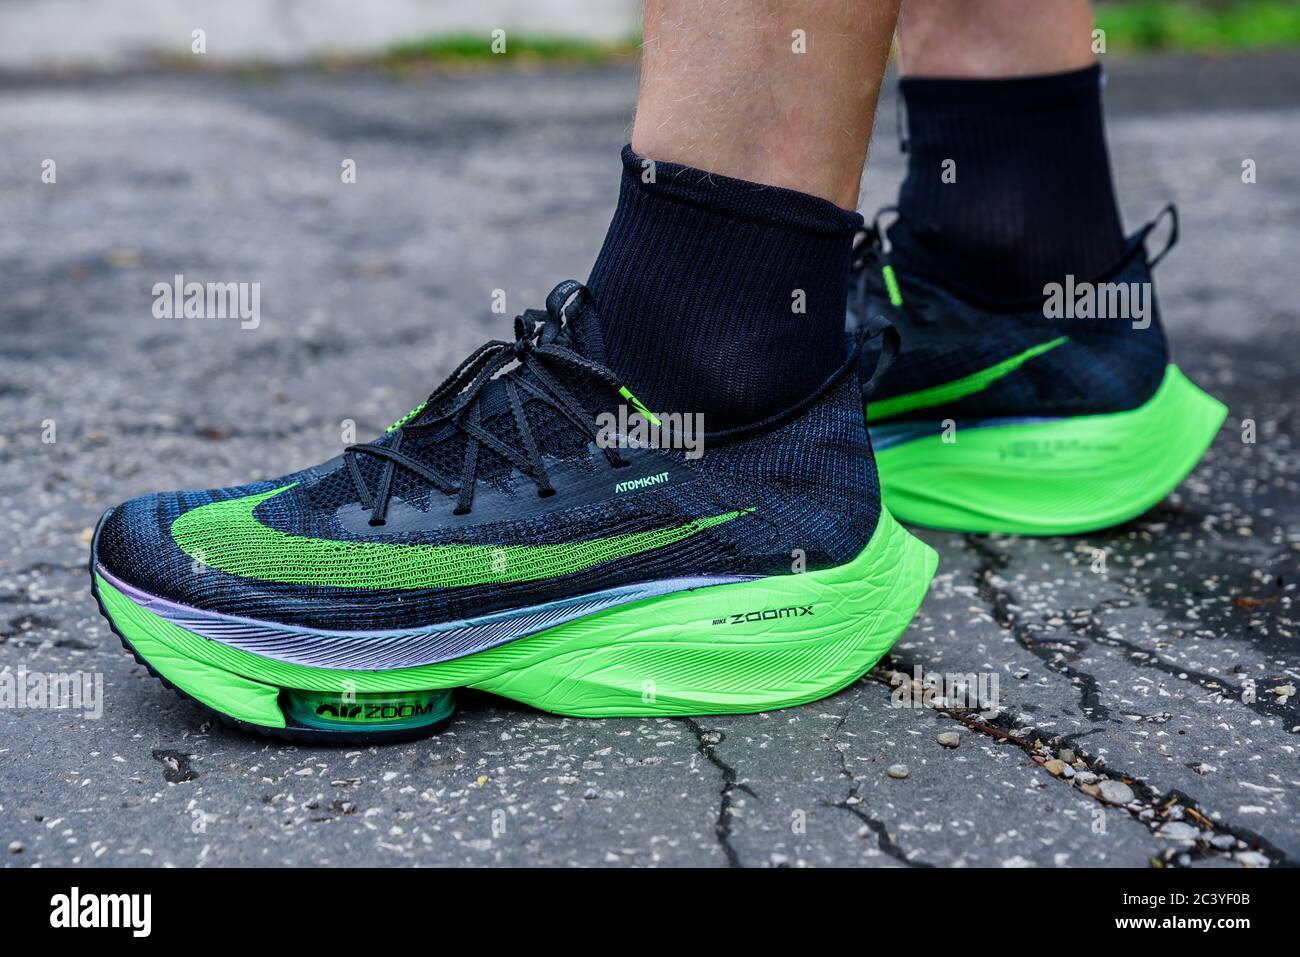 Page 3 - Nike Footwear High Resolution Stock Photography and Images - Alamy